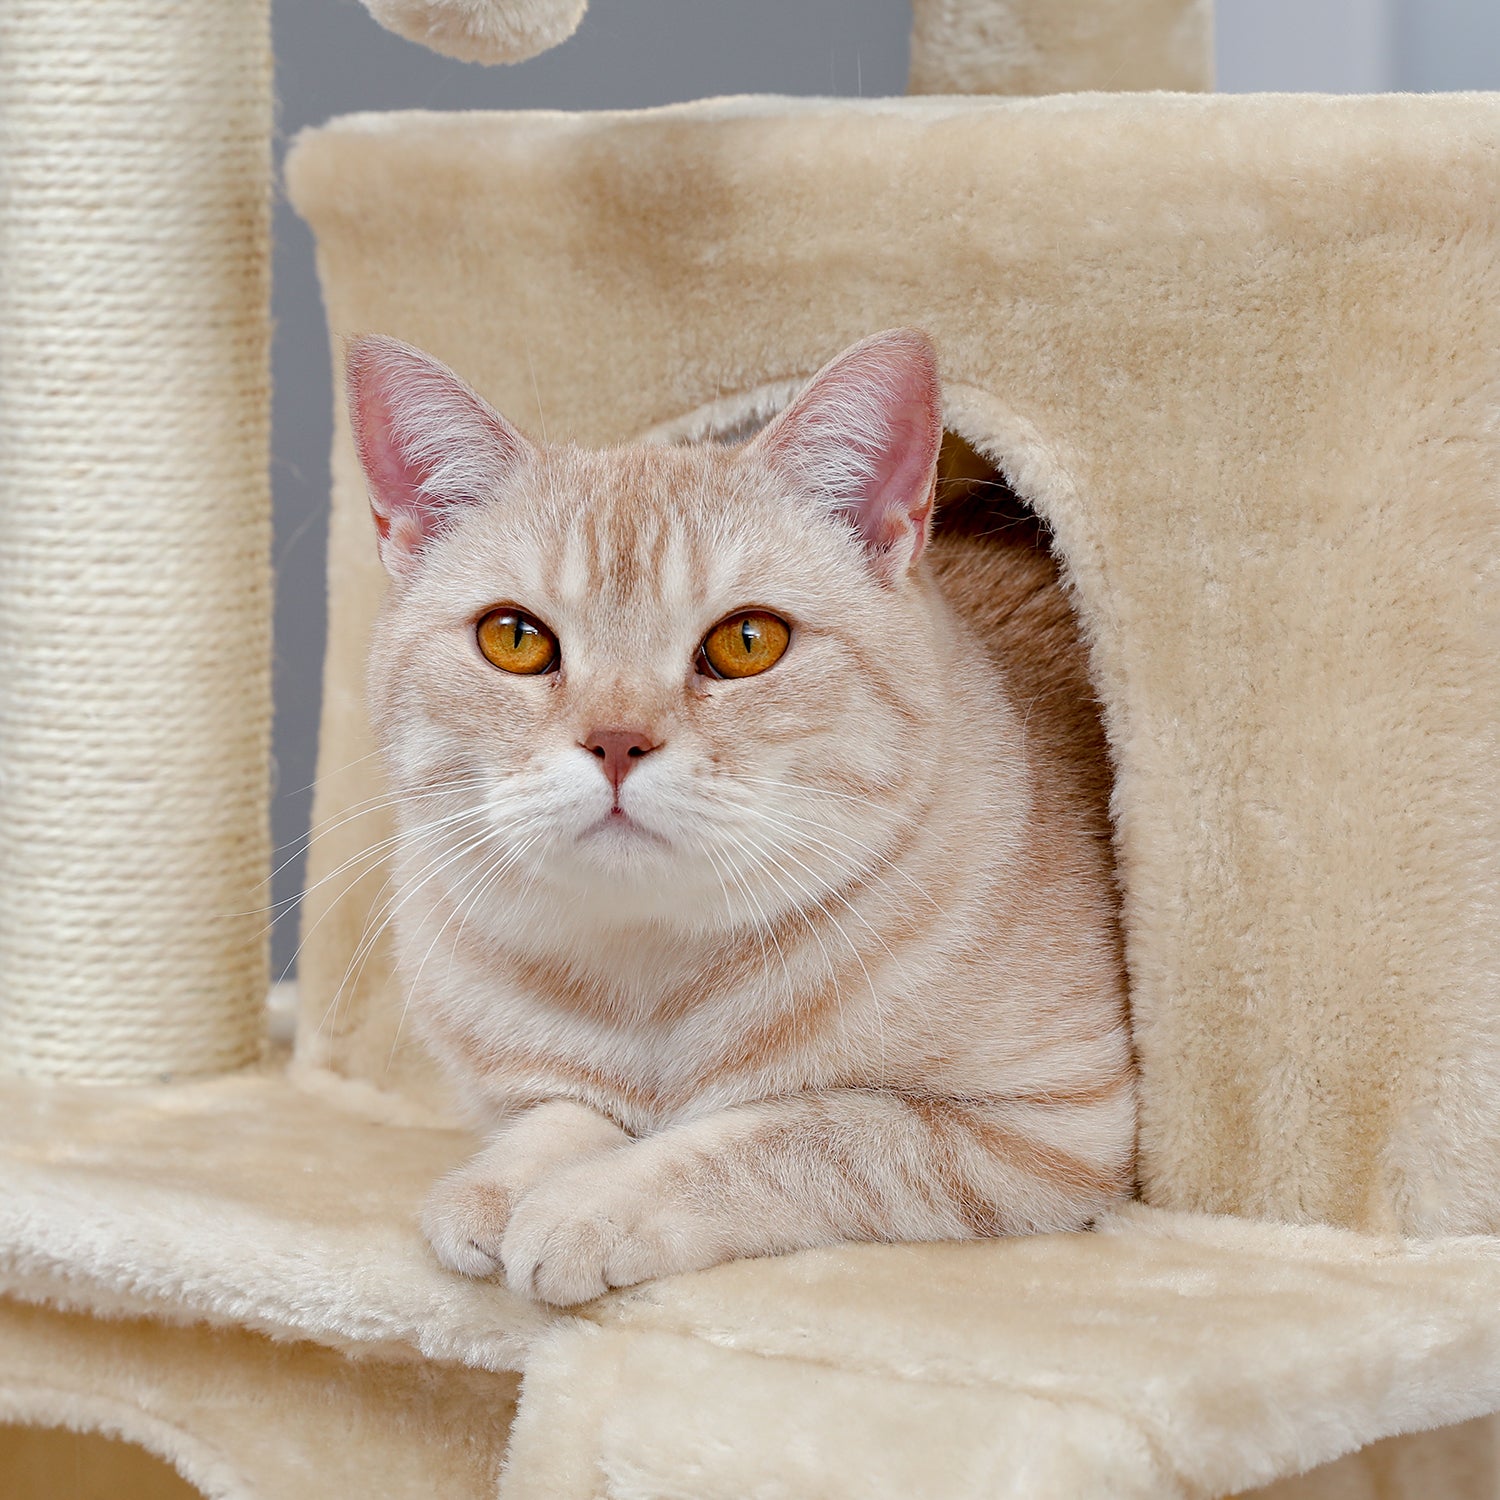 Modern Small Cat Tree Cat Tower With Double Condos Spacious Perch Sisal Scratching Posts，Climbing Ladder and Replaceable Dangling Balls Beige